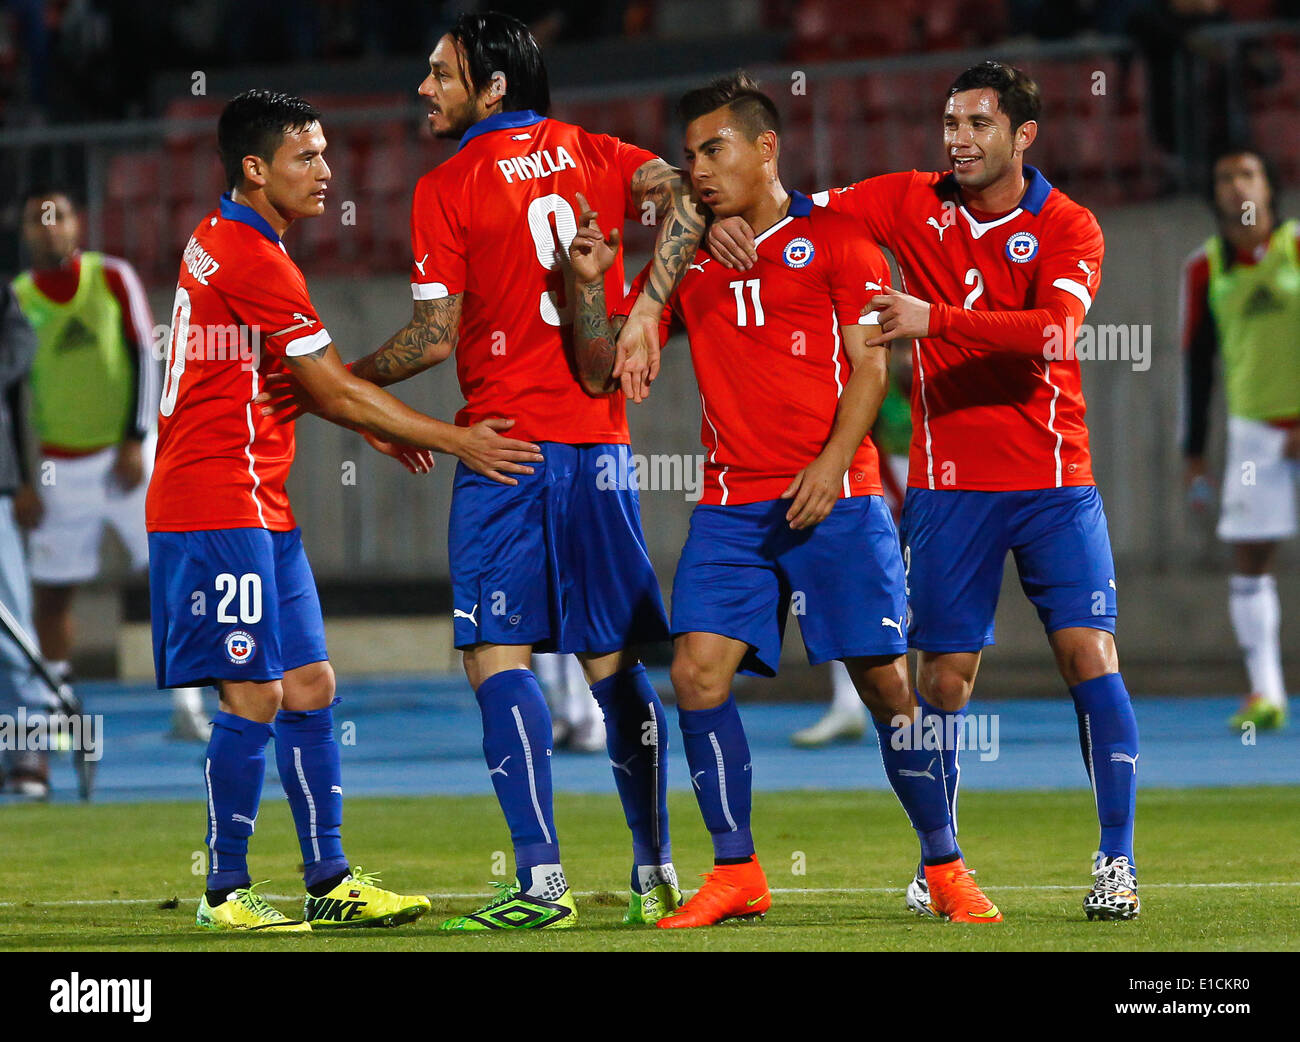 Santiago, Chile. 30th May, 2014. Eduardo Vargas (2nd R) of Chile celebrates his goal during their international friendly soccer match against Egypt in Santiago City, capital of Chile, on May 30, 2014. © Stringer/Xinhua/Alamy Live News Stock Photo